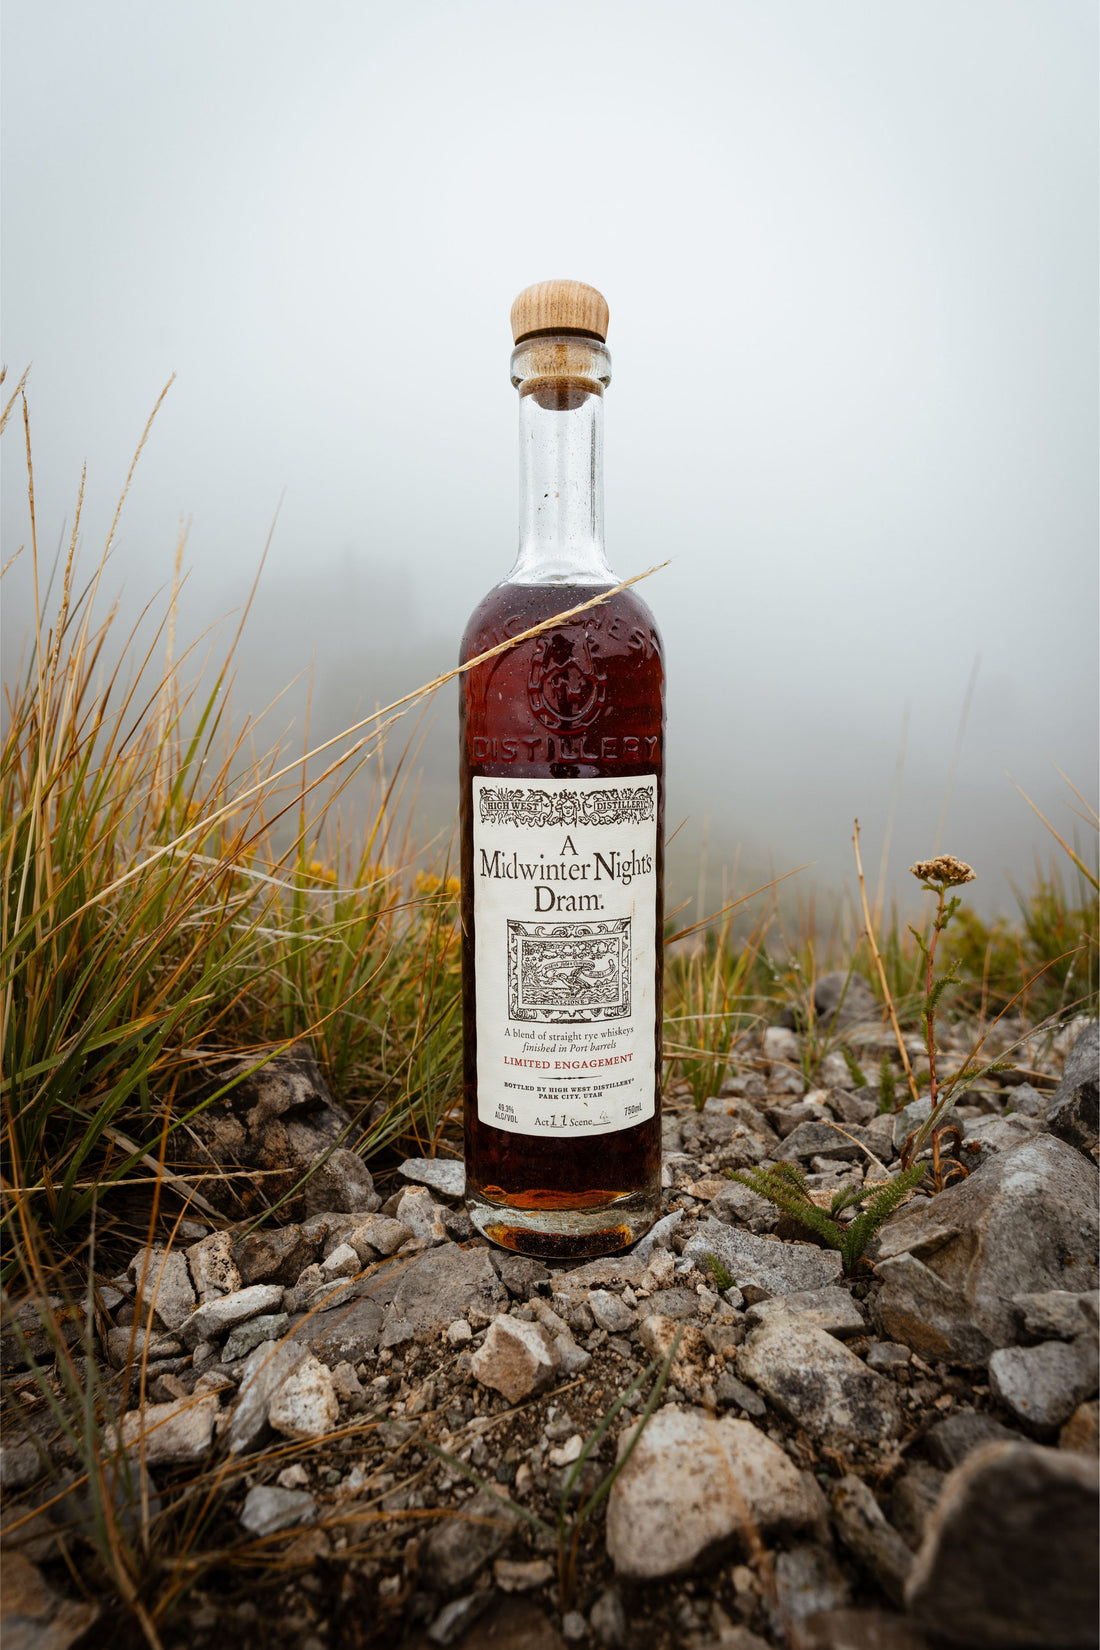 High West Distillery Launches A Midwinter Night's Dram Act 11 DTC in California Alongside eCommerce Partner Speakeasy Co